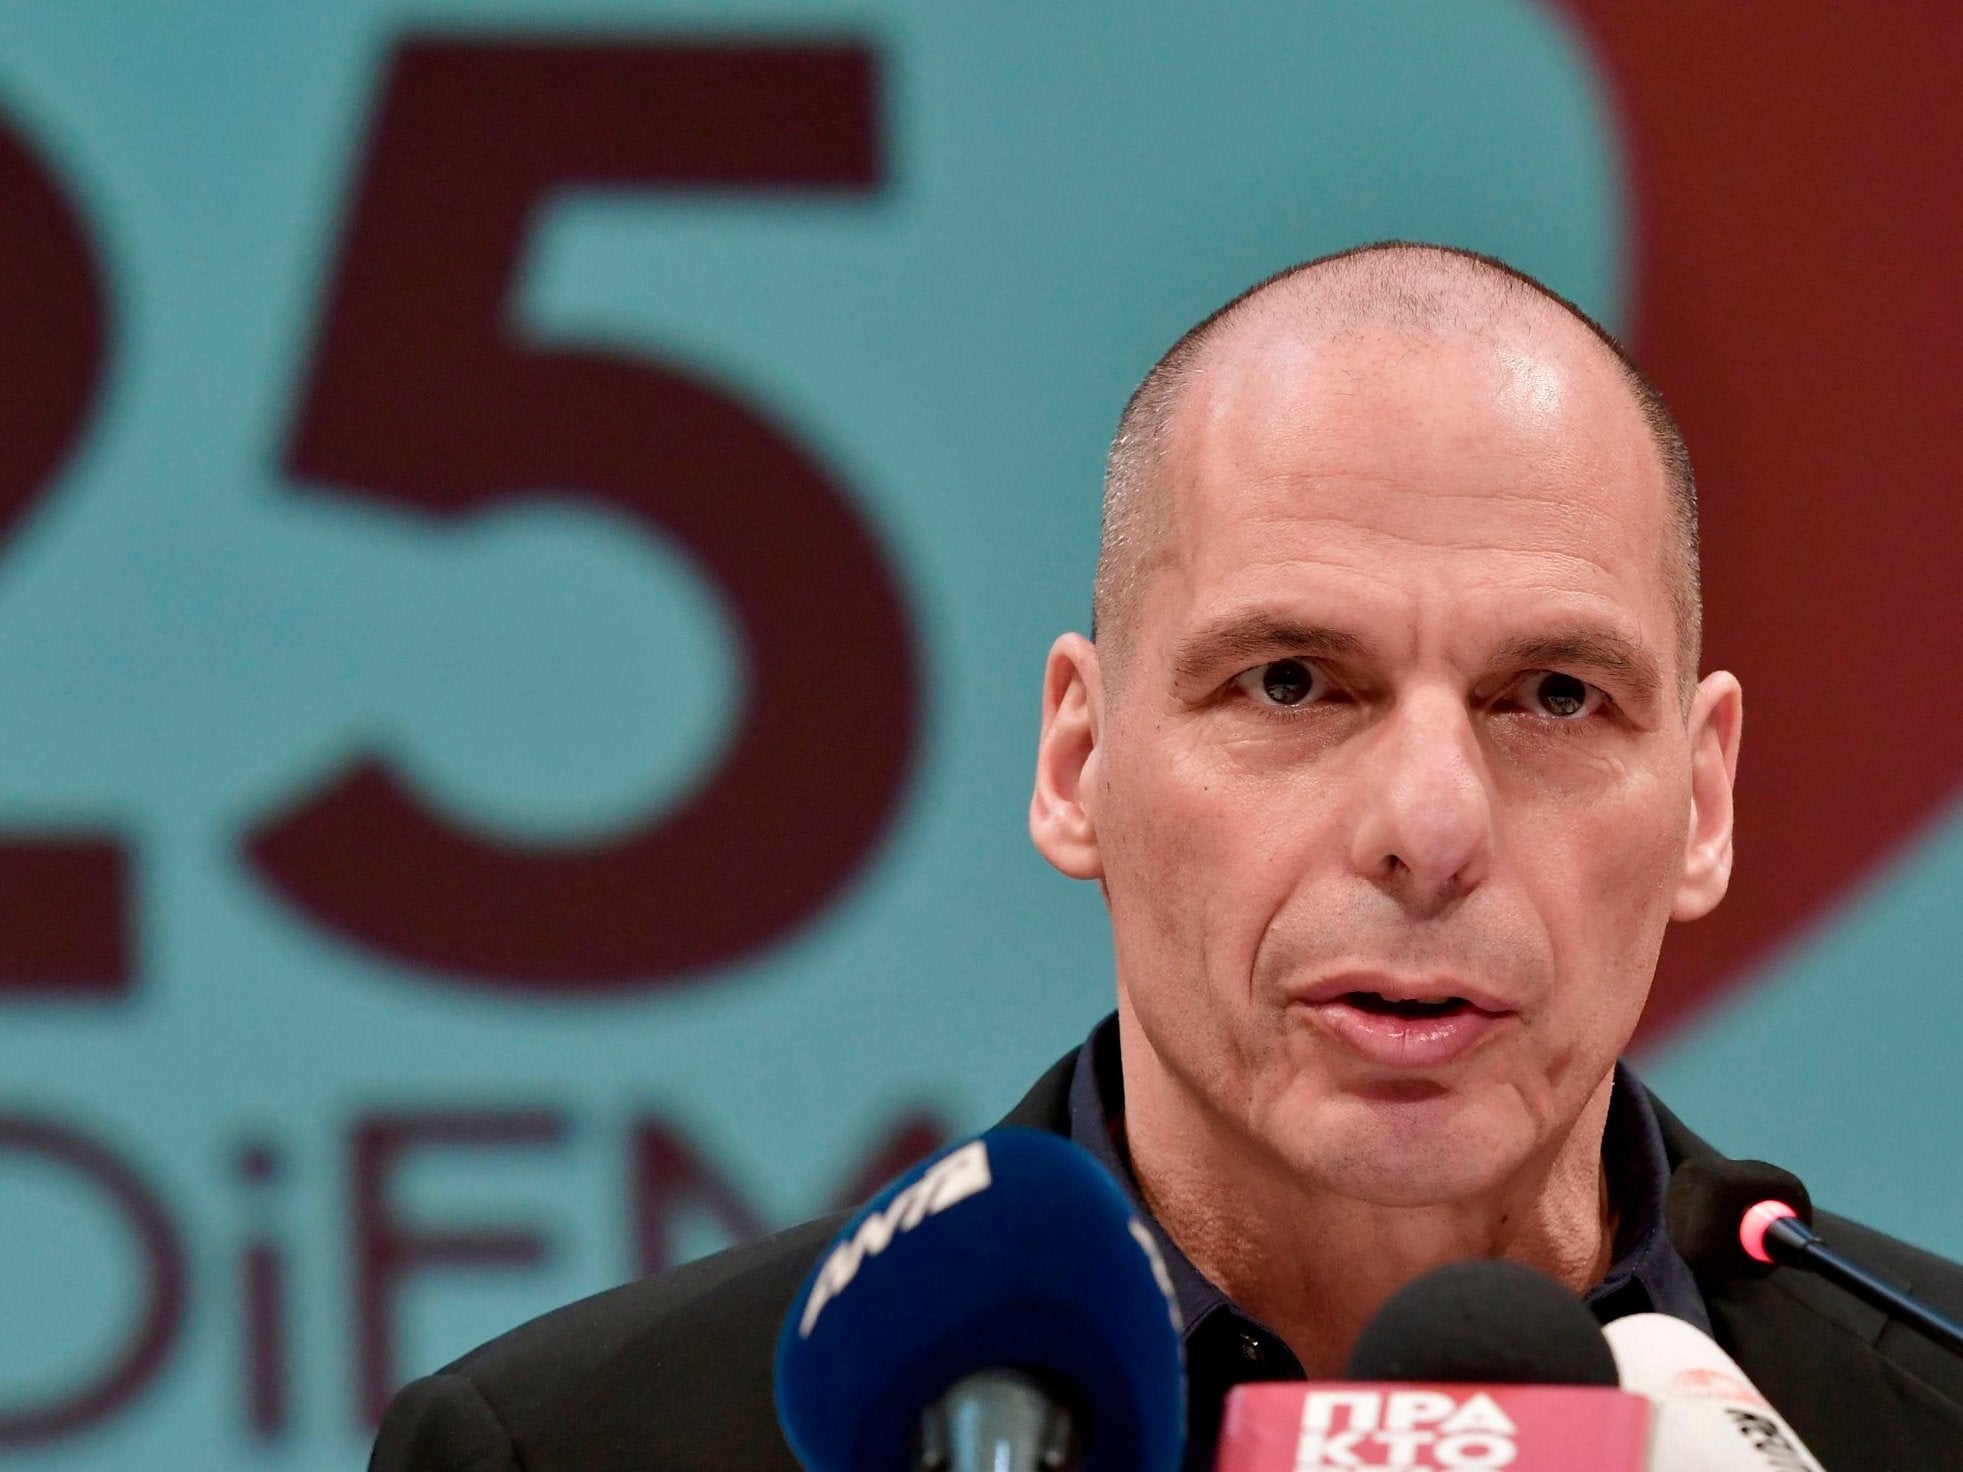 Greece’s former finance minister Yanis Varoufakis said Greek ship owners had a vested interest in blocking the interruption of Russian oil supplies